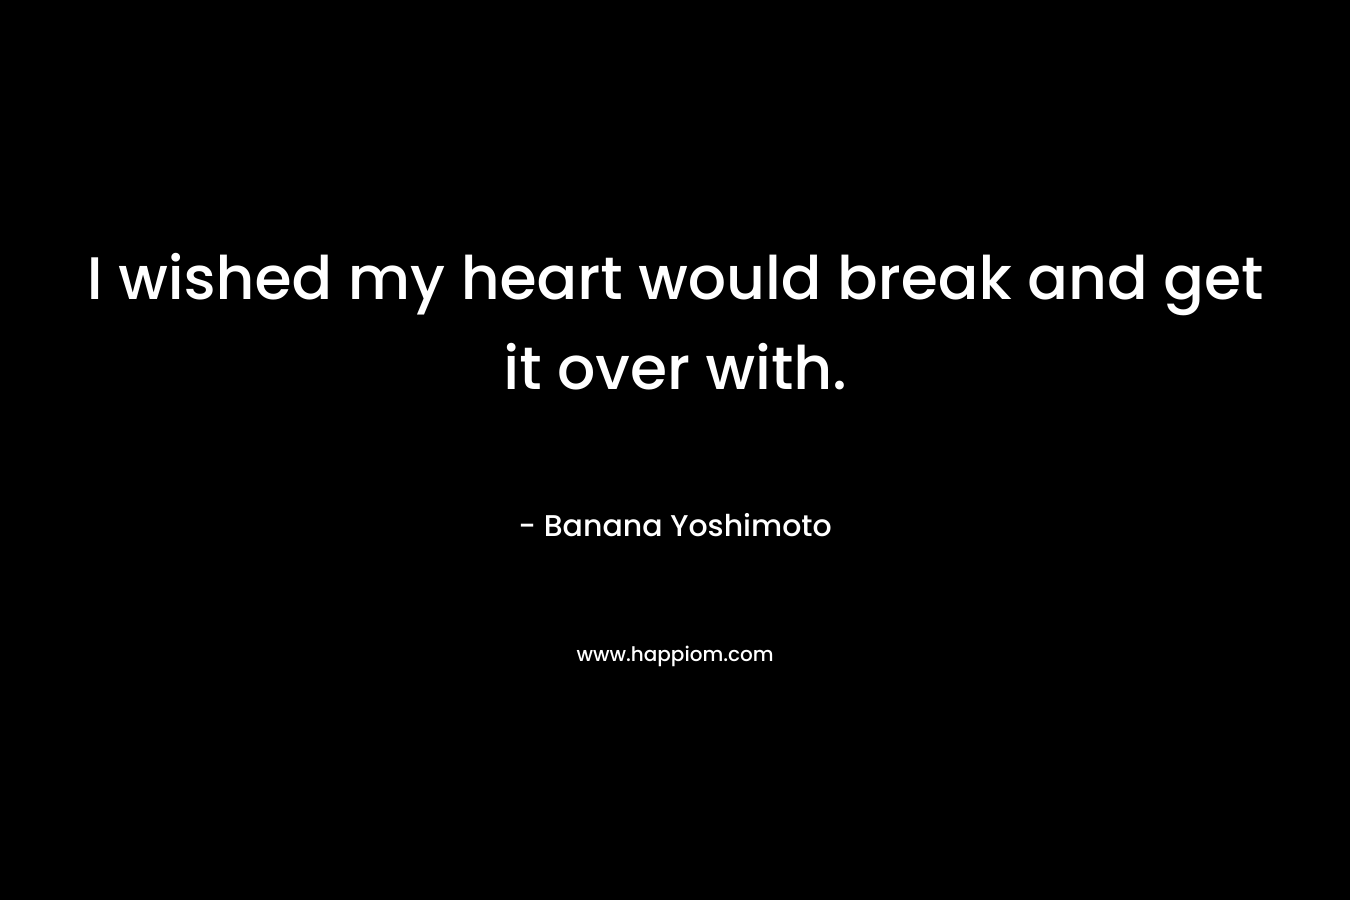 I wished my heart would break and get it over with.